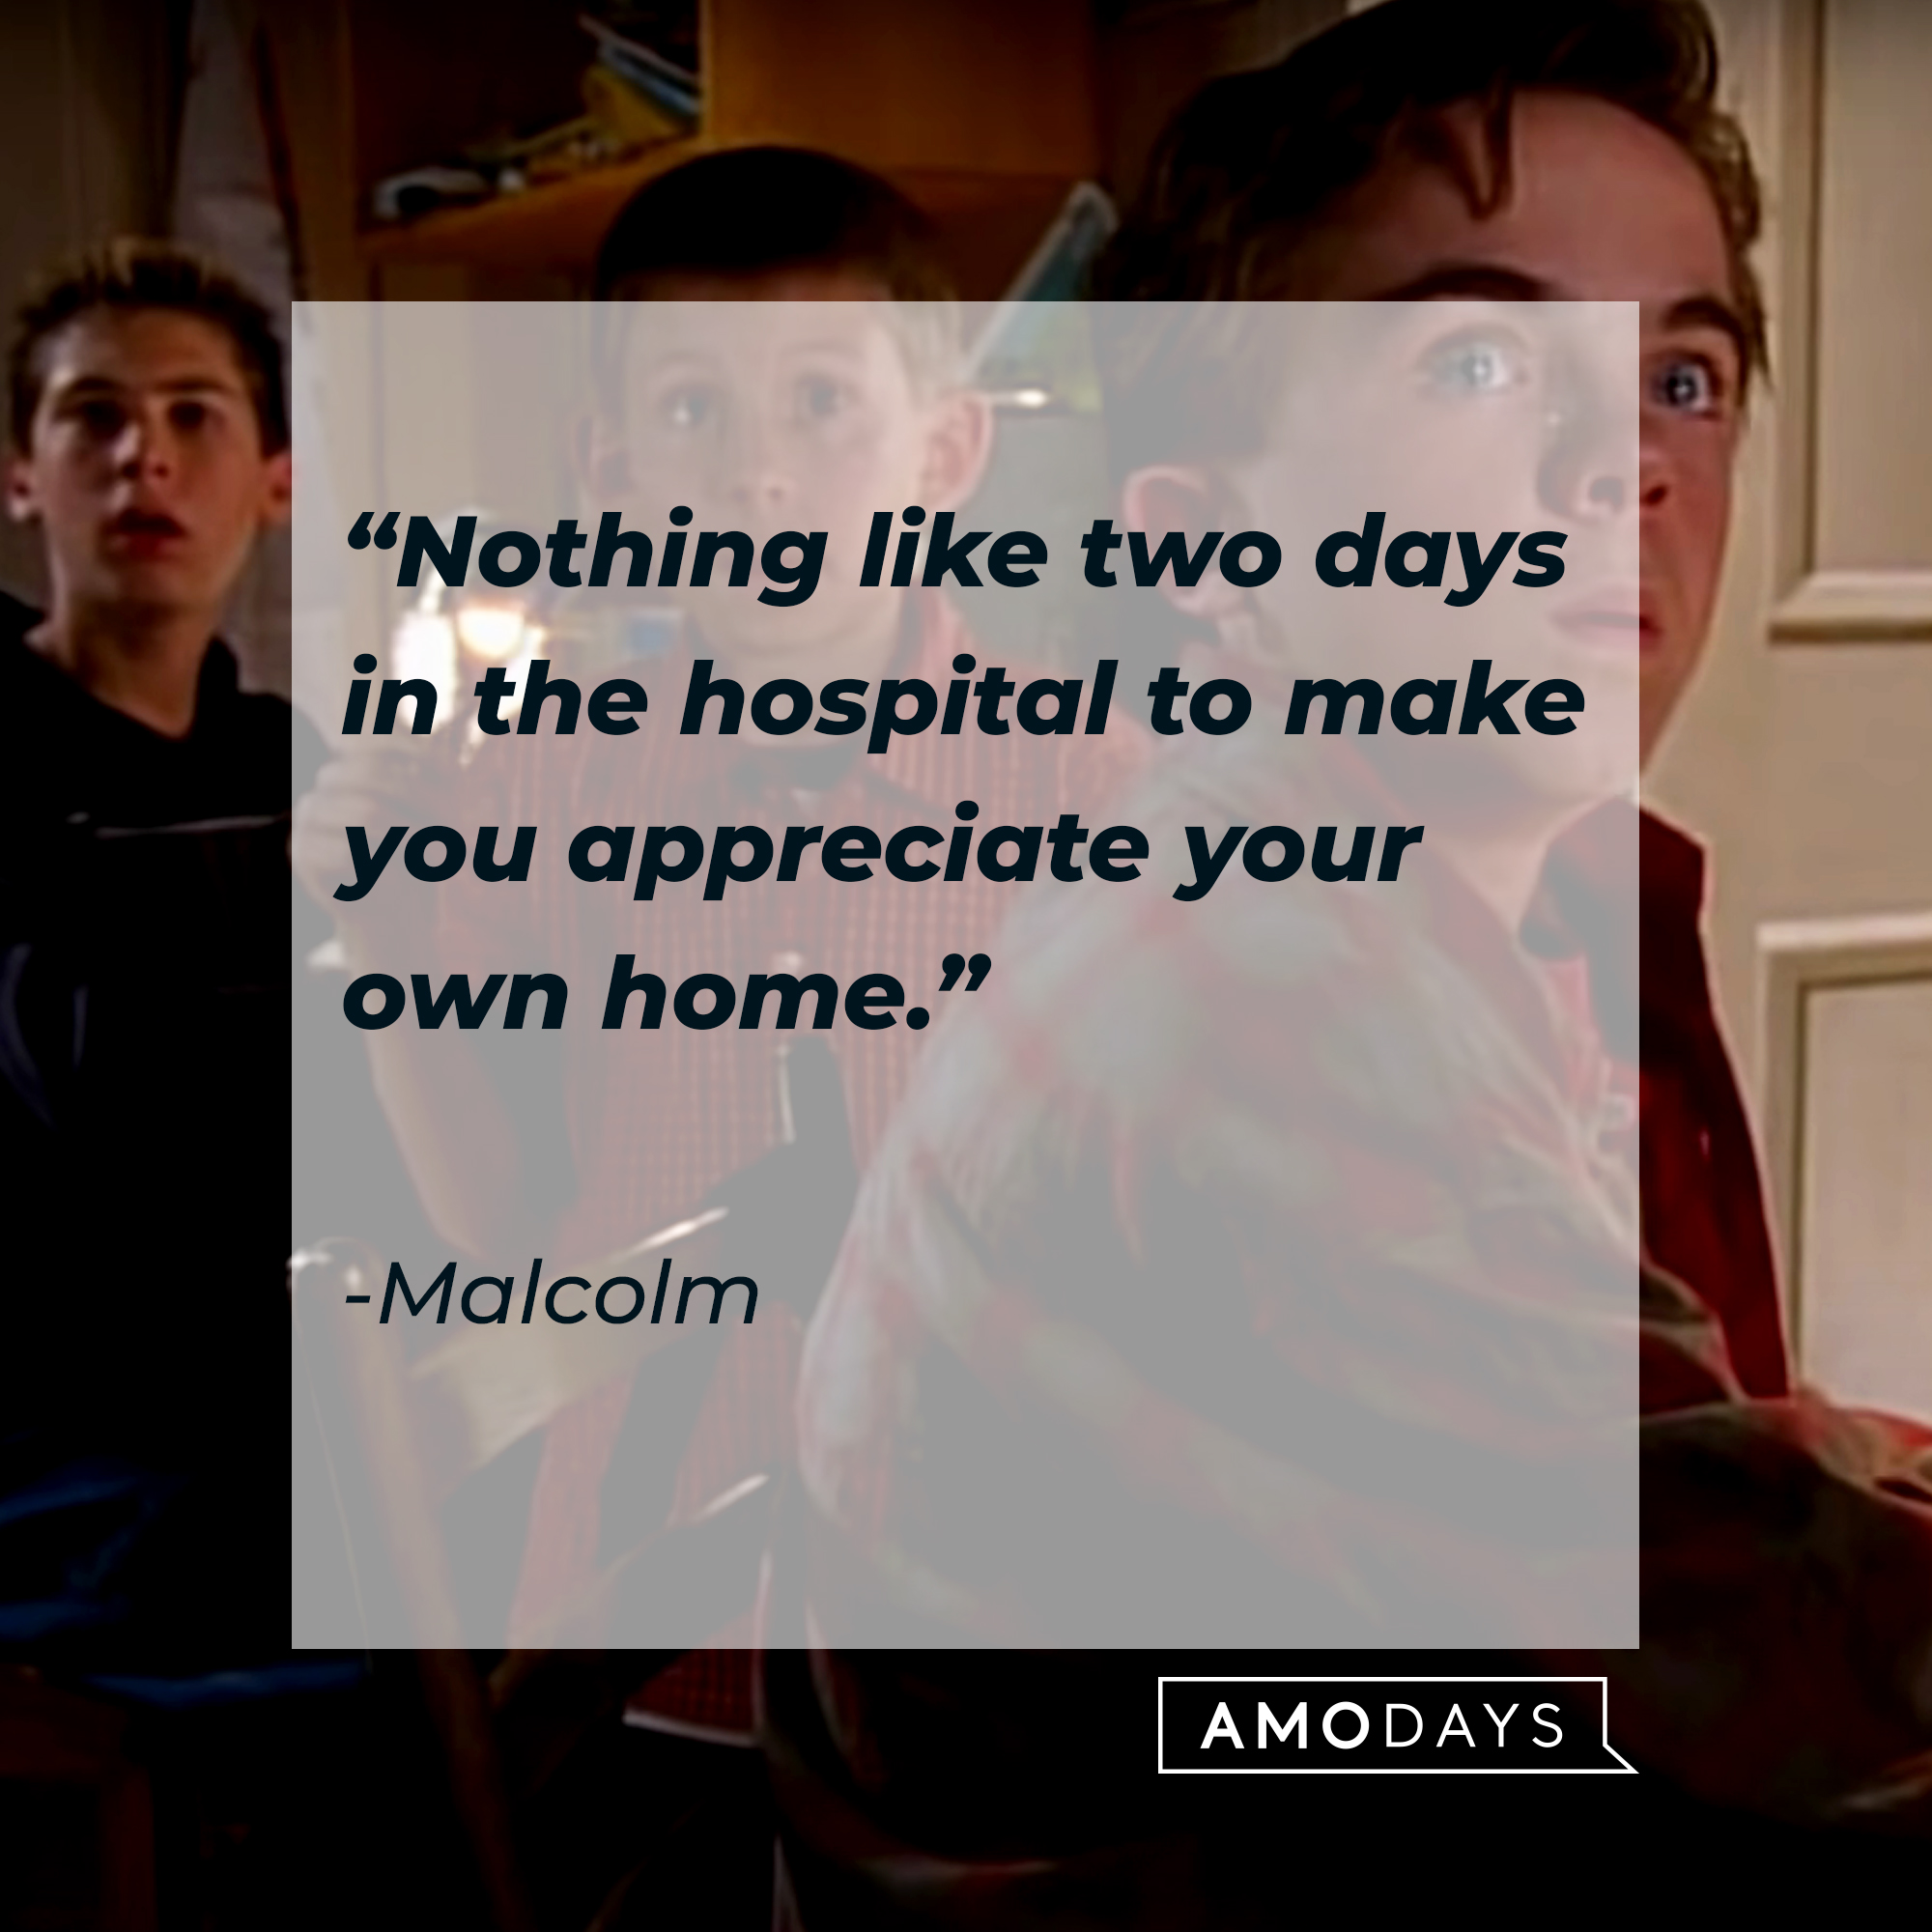 "Malcolm in the Middle" characters with Malcolm's quote: “Nothing like two days in the hospital to make you appreciate your own home.” | Source: YouTube.com/Channel4